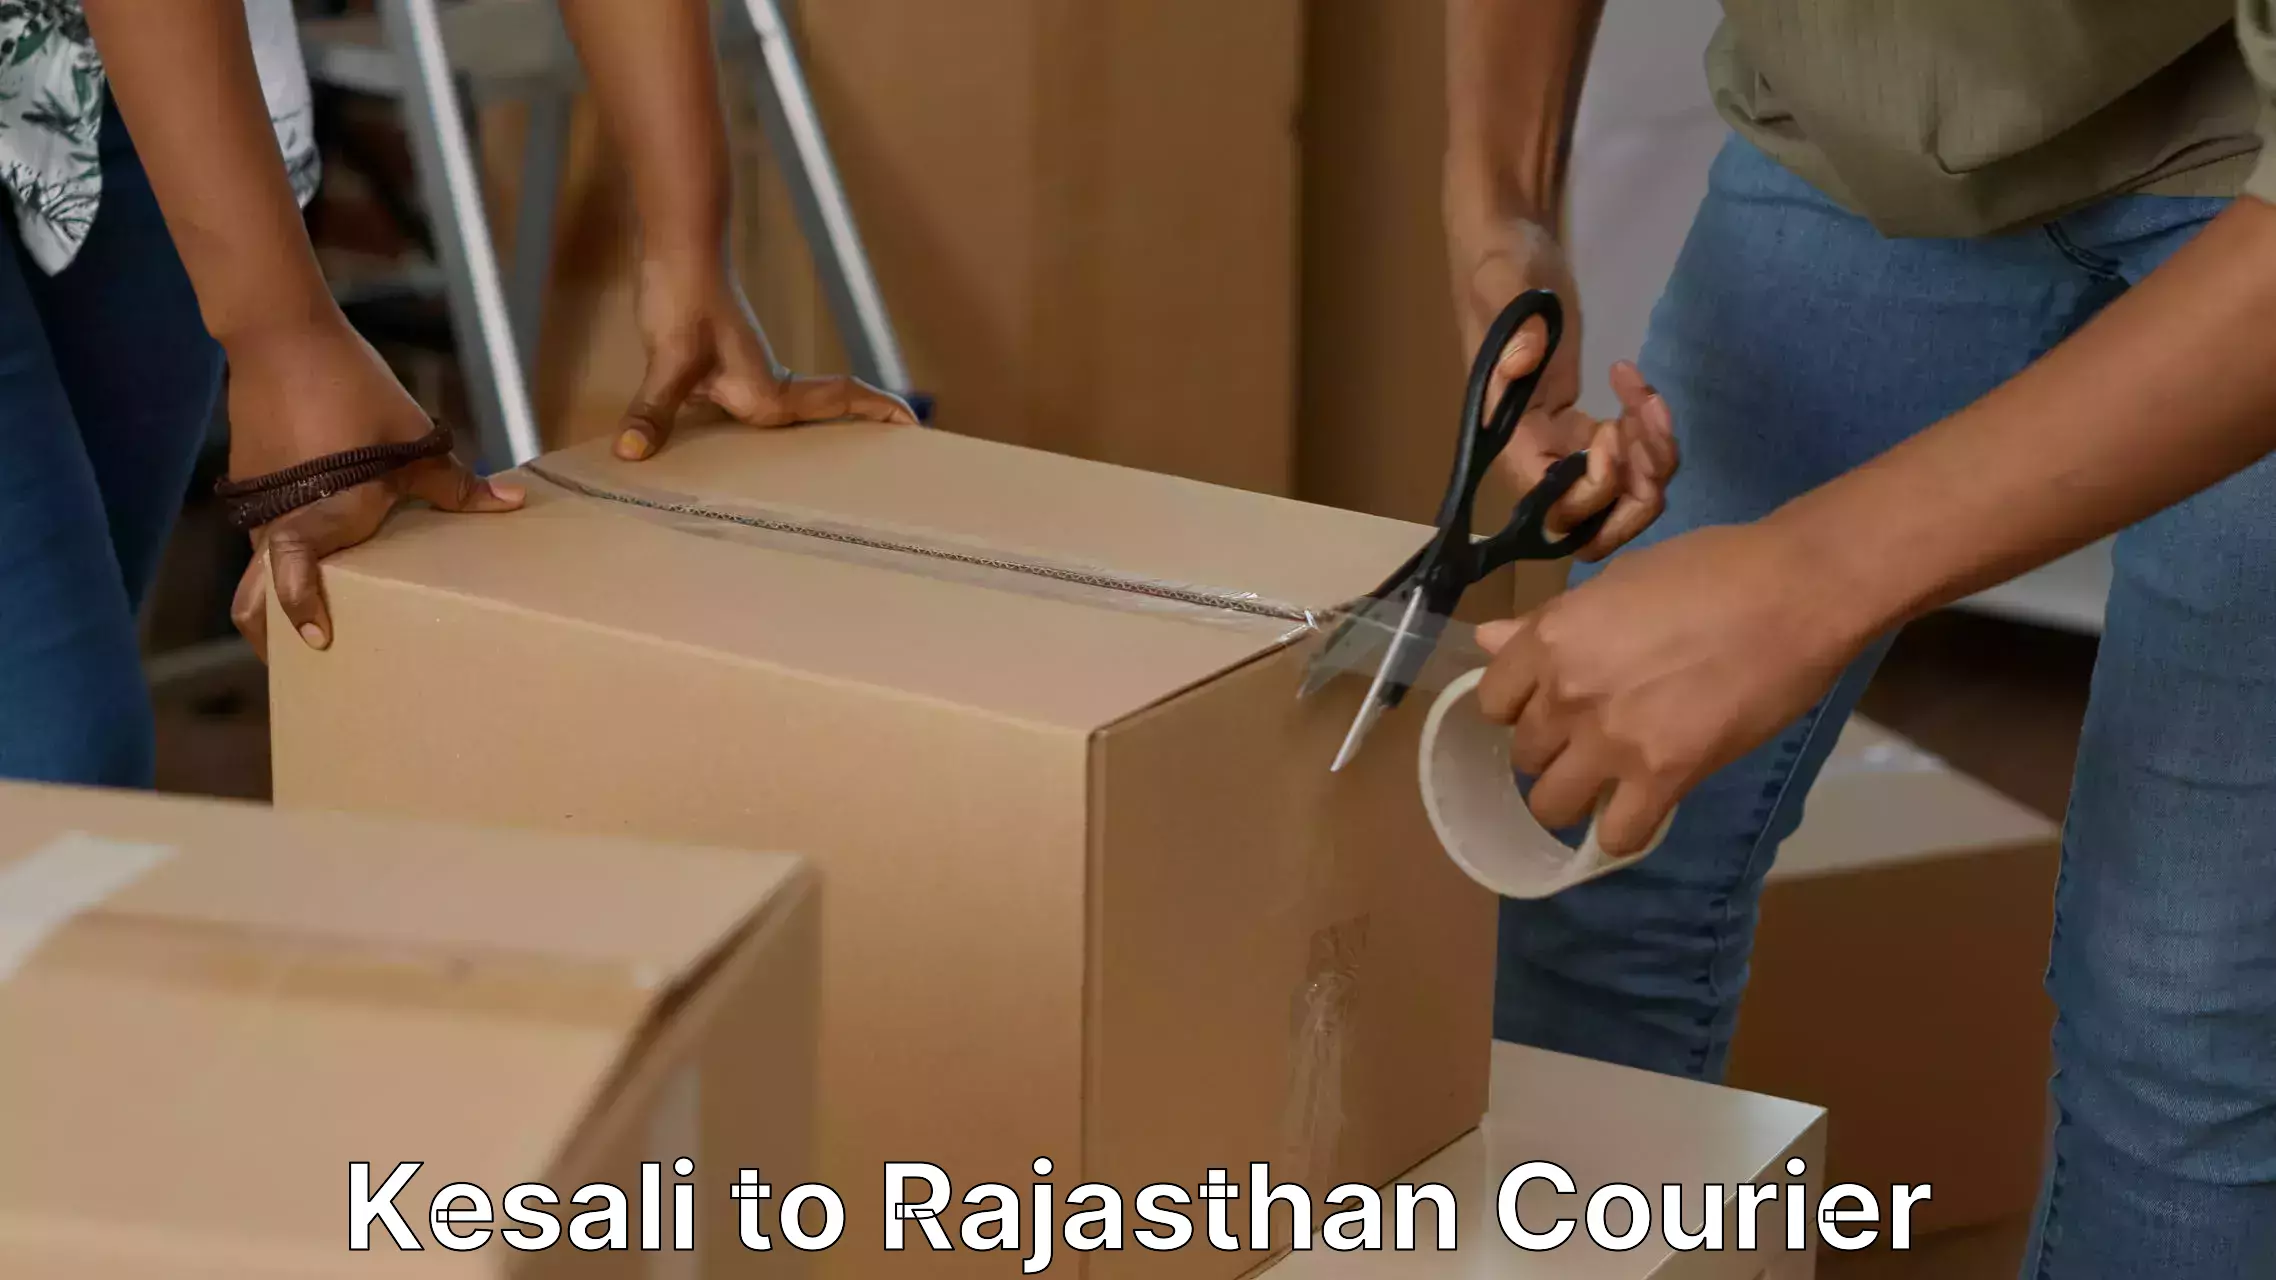 Professional movers and packers Kesali to Rajasthan